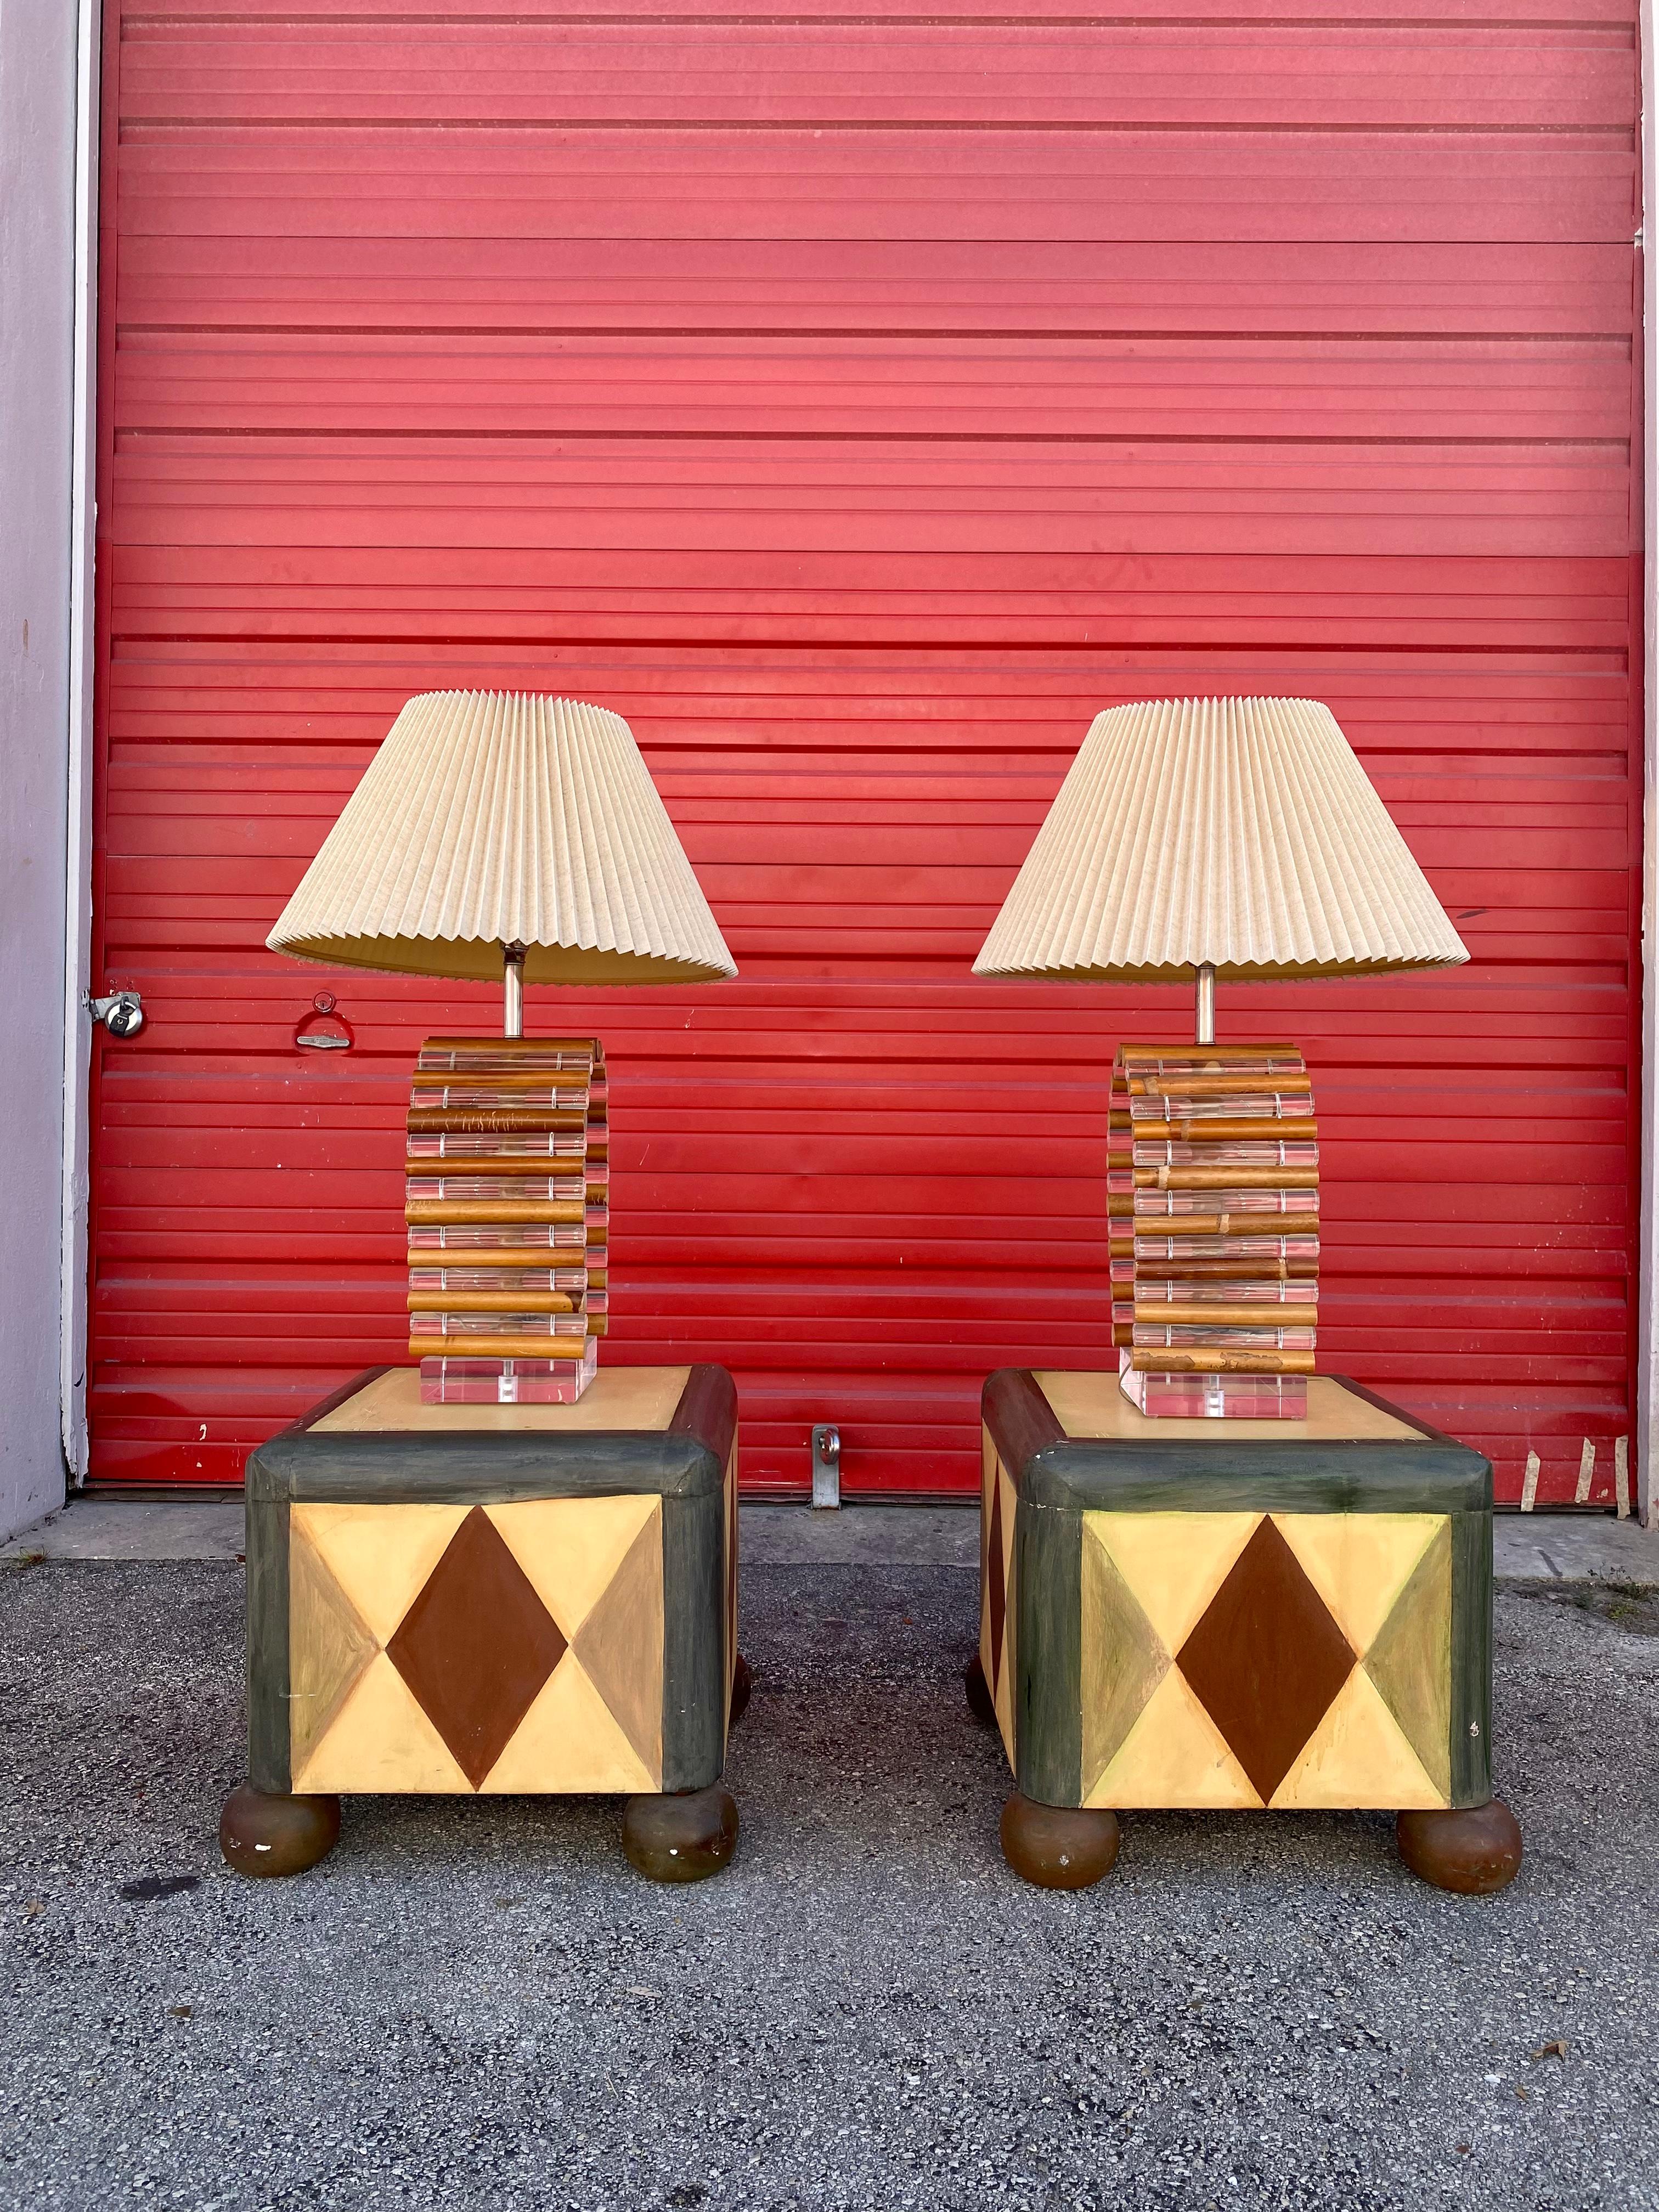 On offer on this occasion is one of the most stunning, Mid Century lamps you could hope to find. This is an ultra-rare opportunity to acquire what is, unequivocally, the best of the best, it being a most spectacular and beautifully-presented 1970s